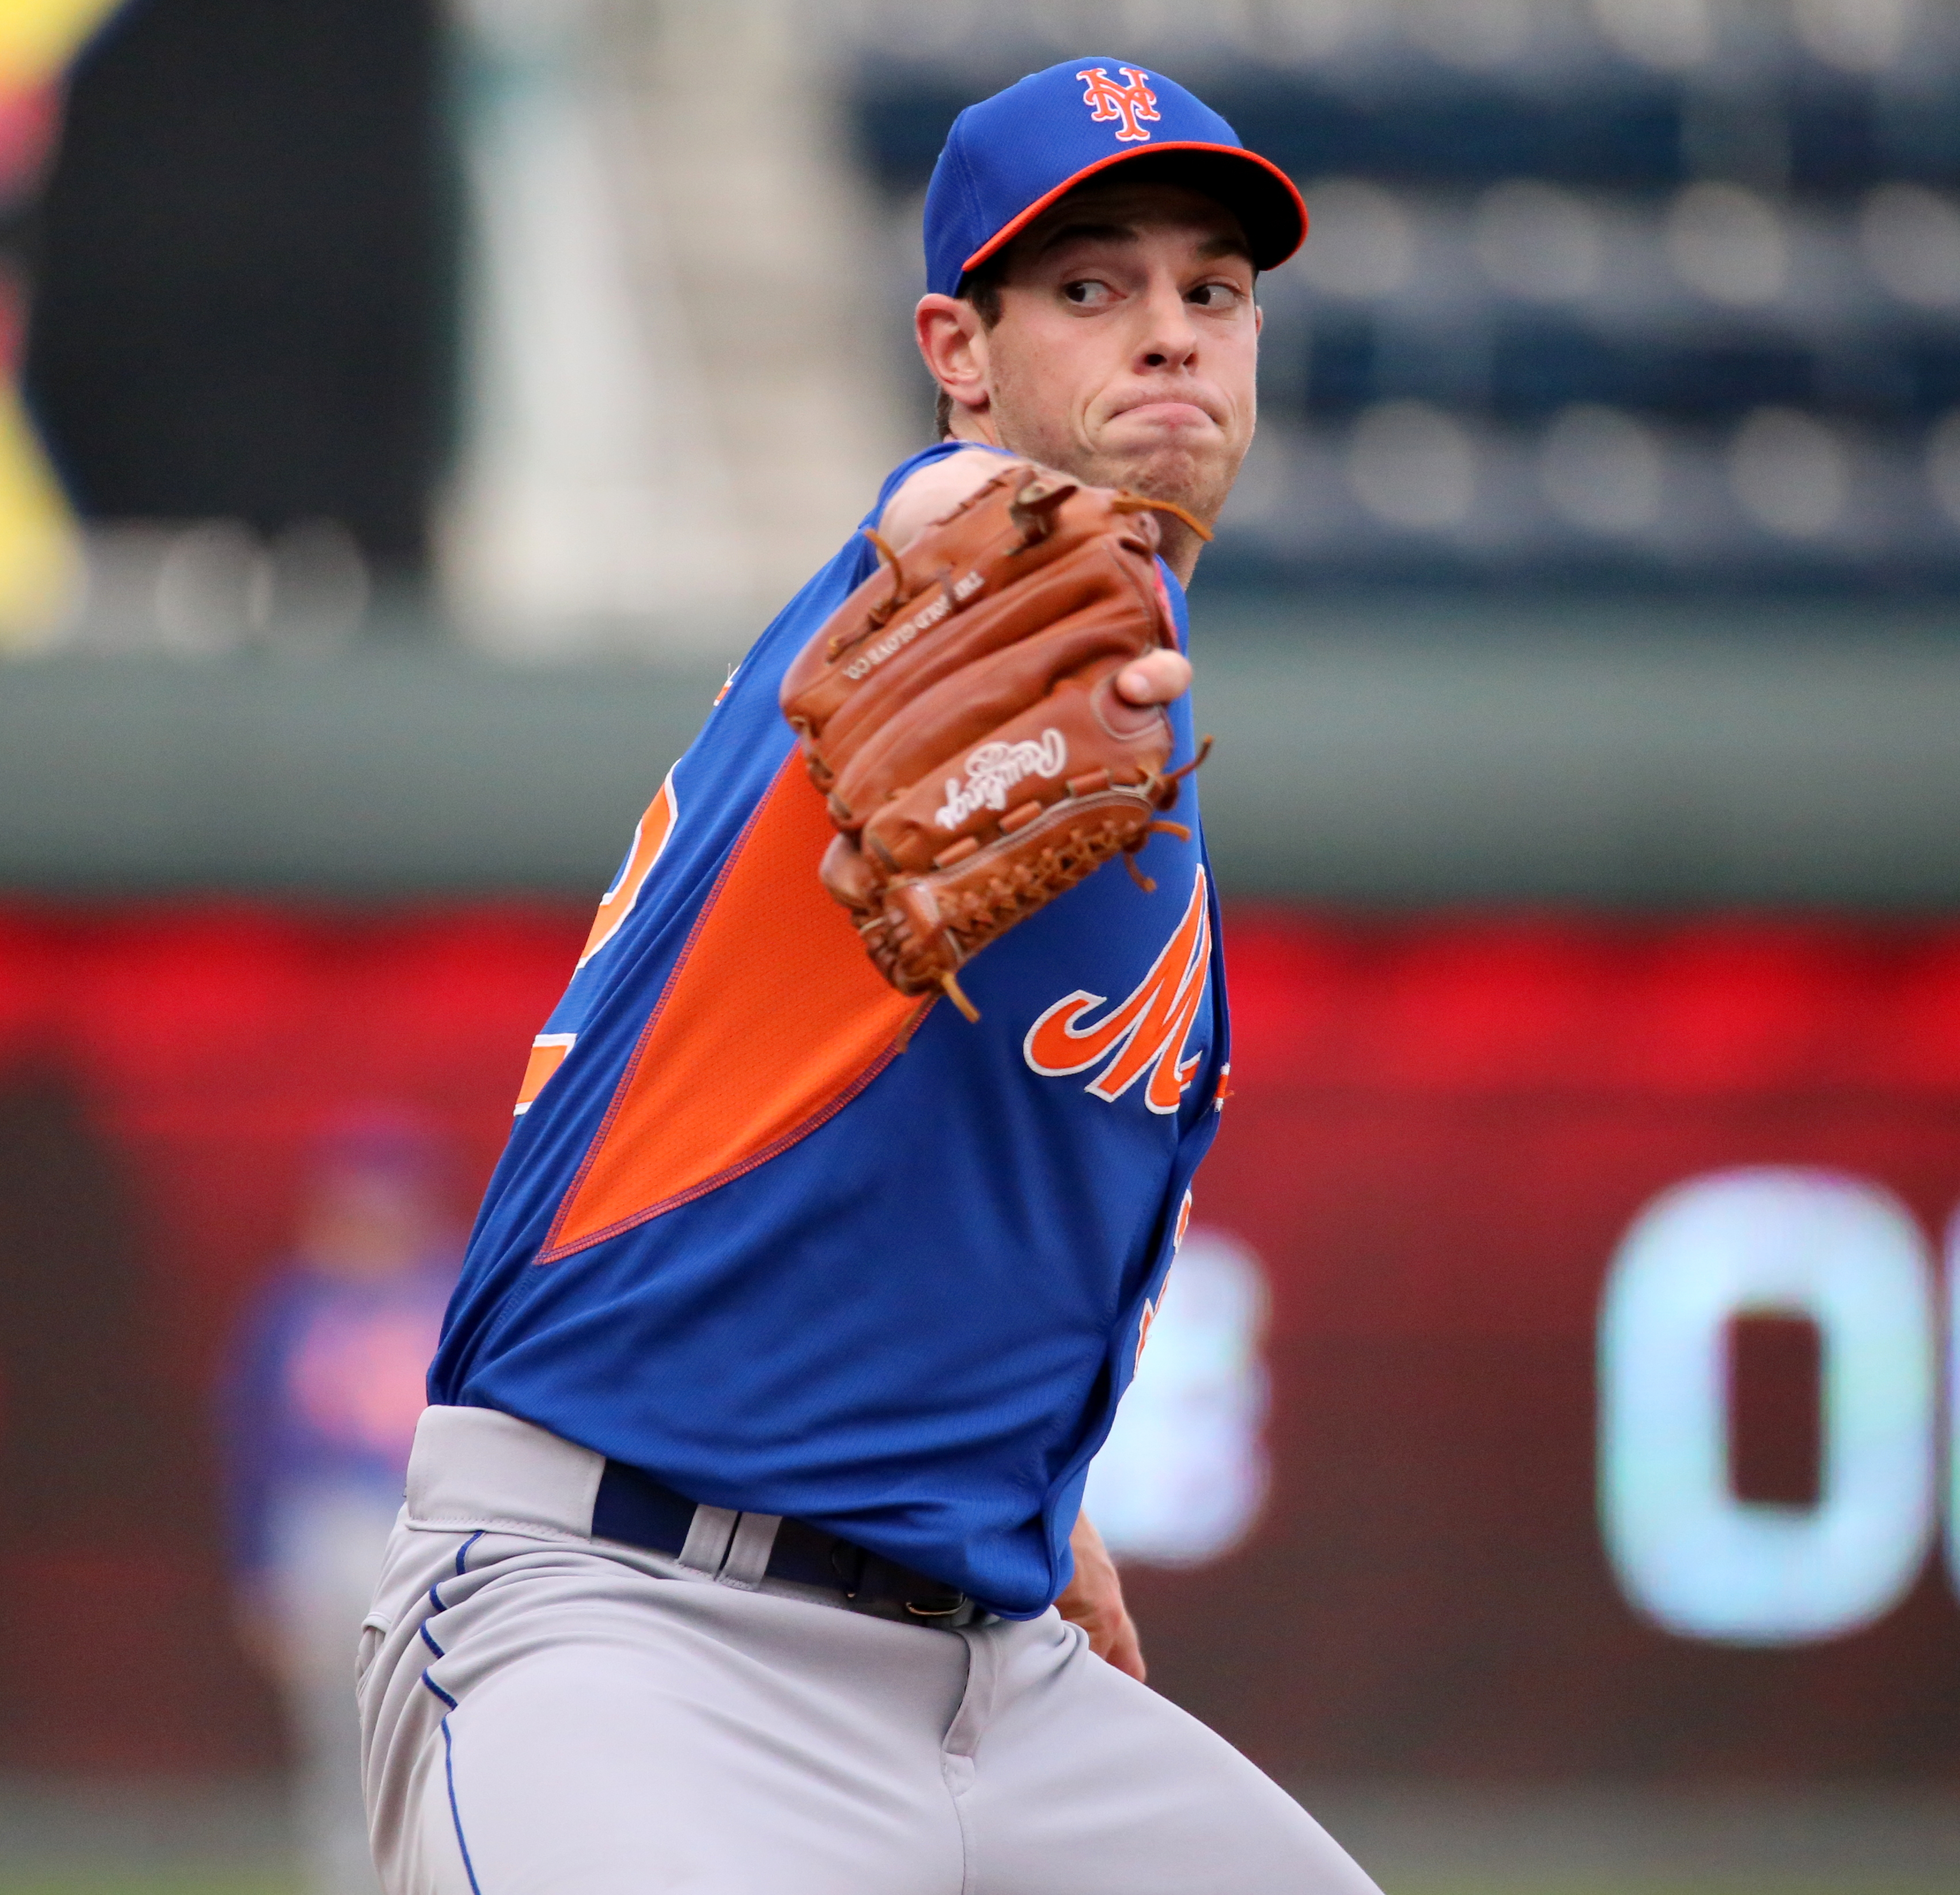 Monday Mets: The Rotation’s Reliance on Reclamation